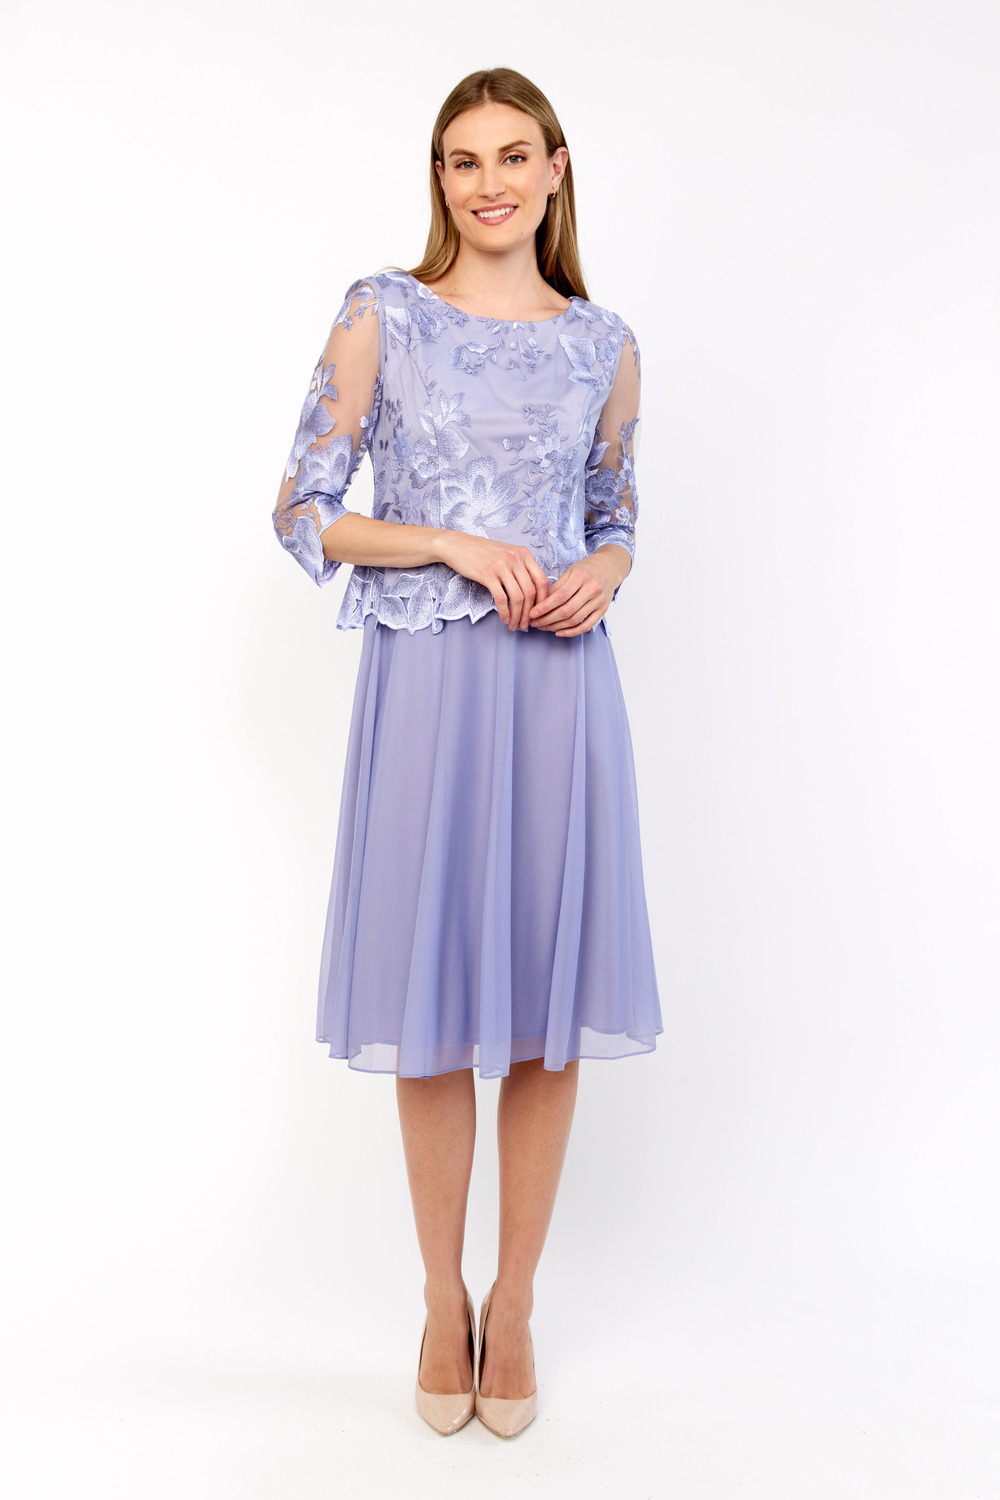 Embroidered Illusion Sleeve Dress Style 81122420. Lavender 